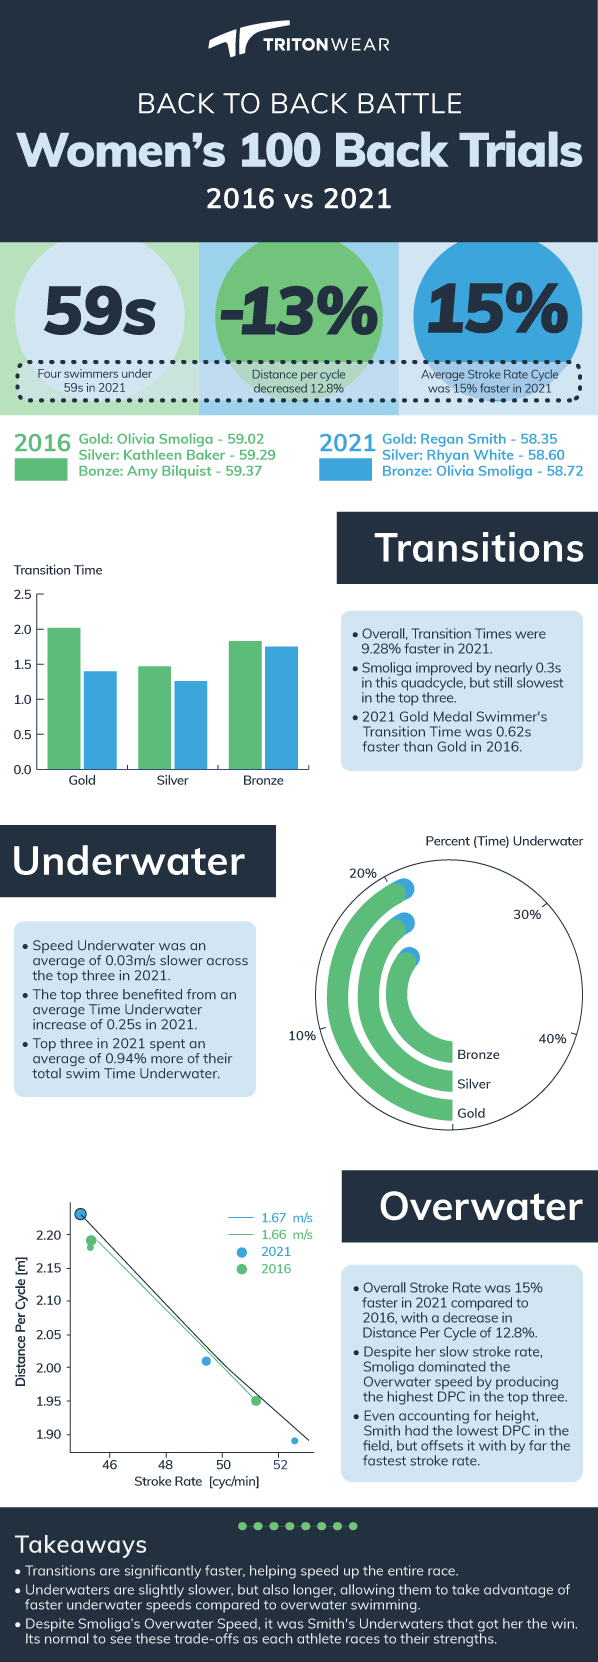 OlympicTrials_Infographic_Womens100Back_Final (1)